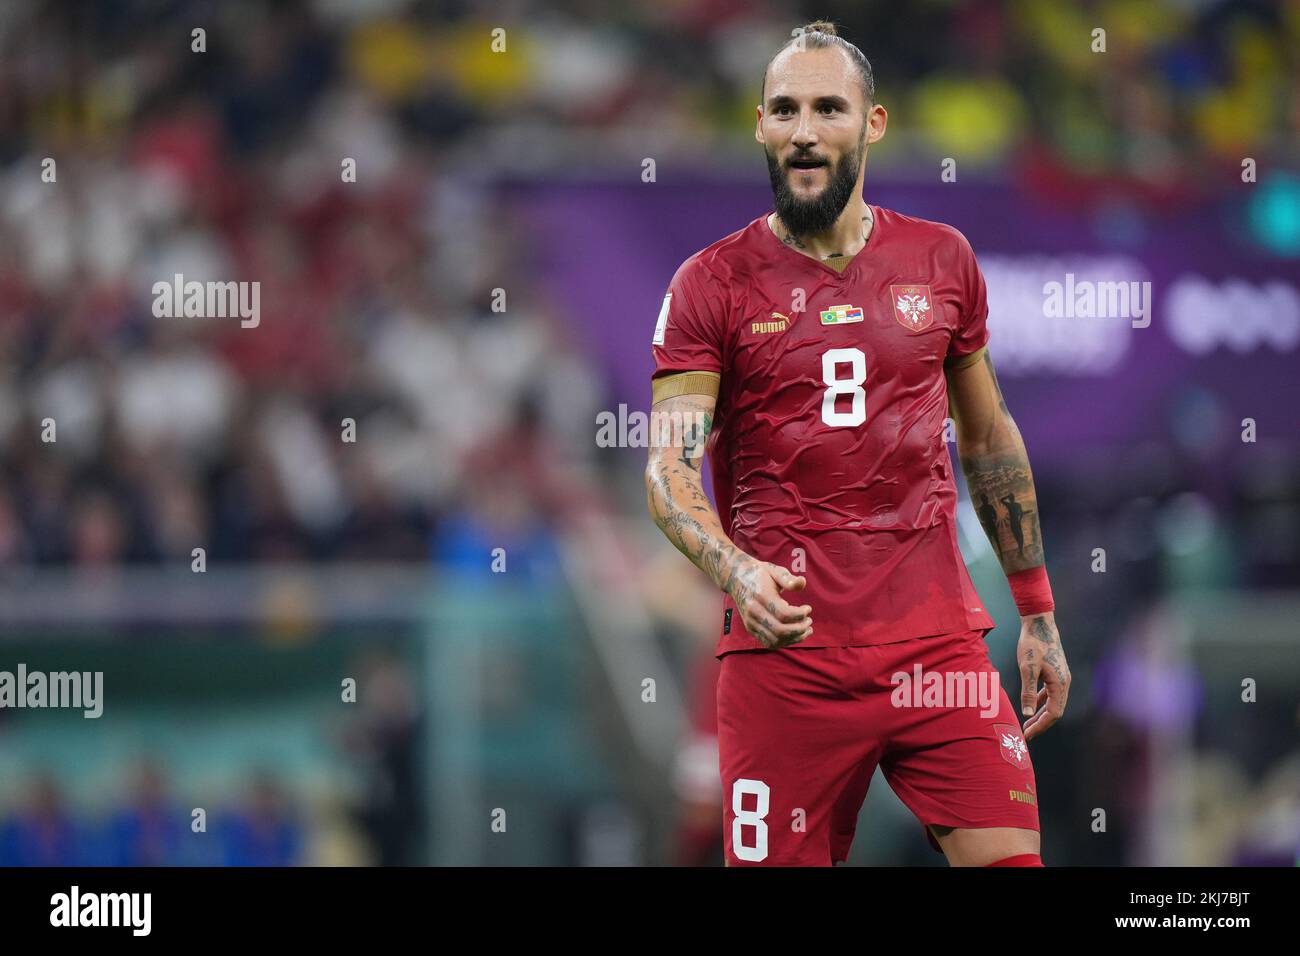 Memanja Gudelj of Serbia during the FIFA World Cup Qatar 2022 match, Group G, between Brazil and Serbia played at Lusail Stadium on Nov 24, 2022 in Lusail, Qatar. (Photo by Bagu Blanco / PRESSIN) Credit: PRESSINPHOTO SPORTS AGENCY/Alamy Live News Stock Photo